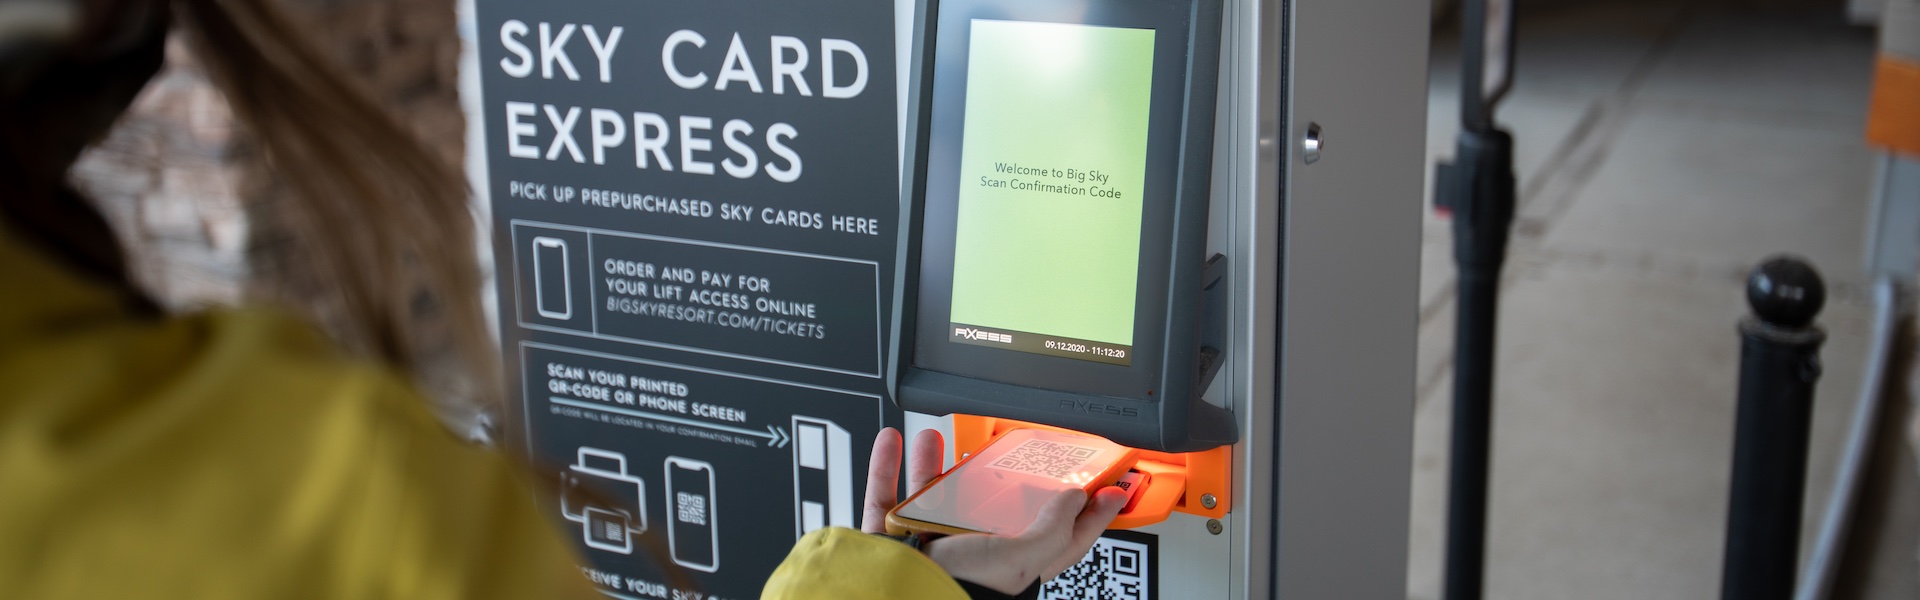 Scanning a phone to print Sky Cards at our Sky Card Express Stations